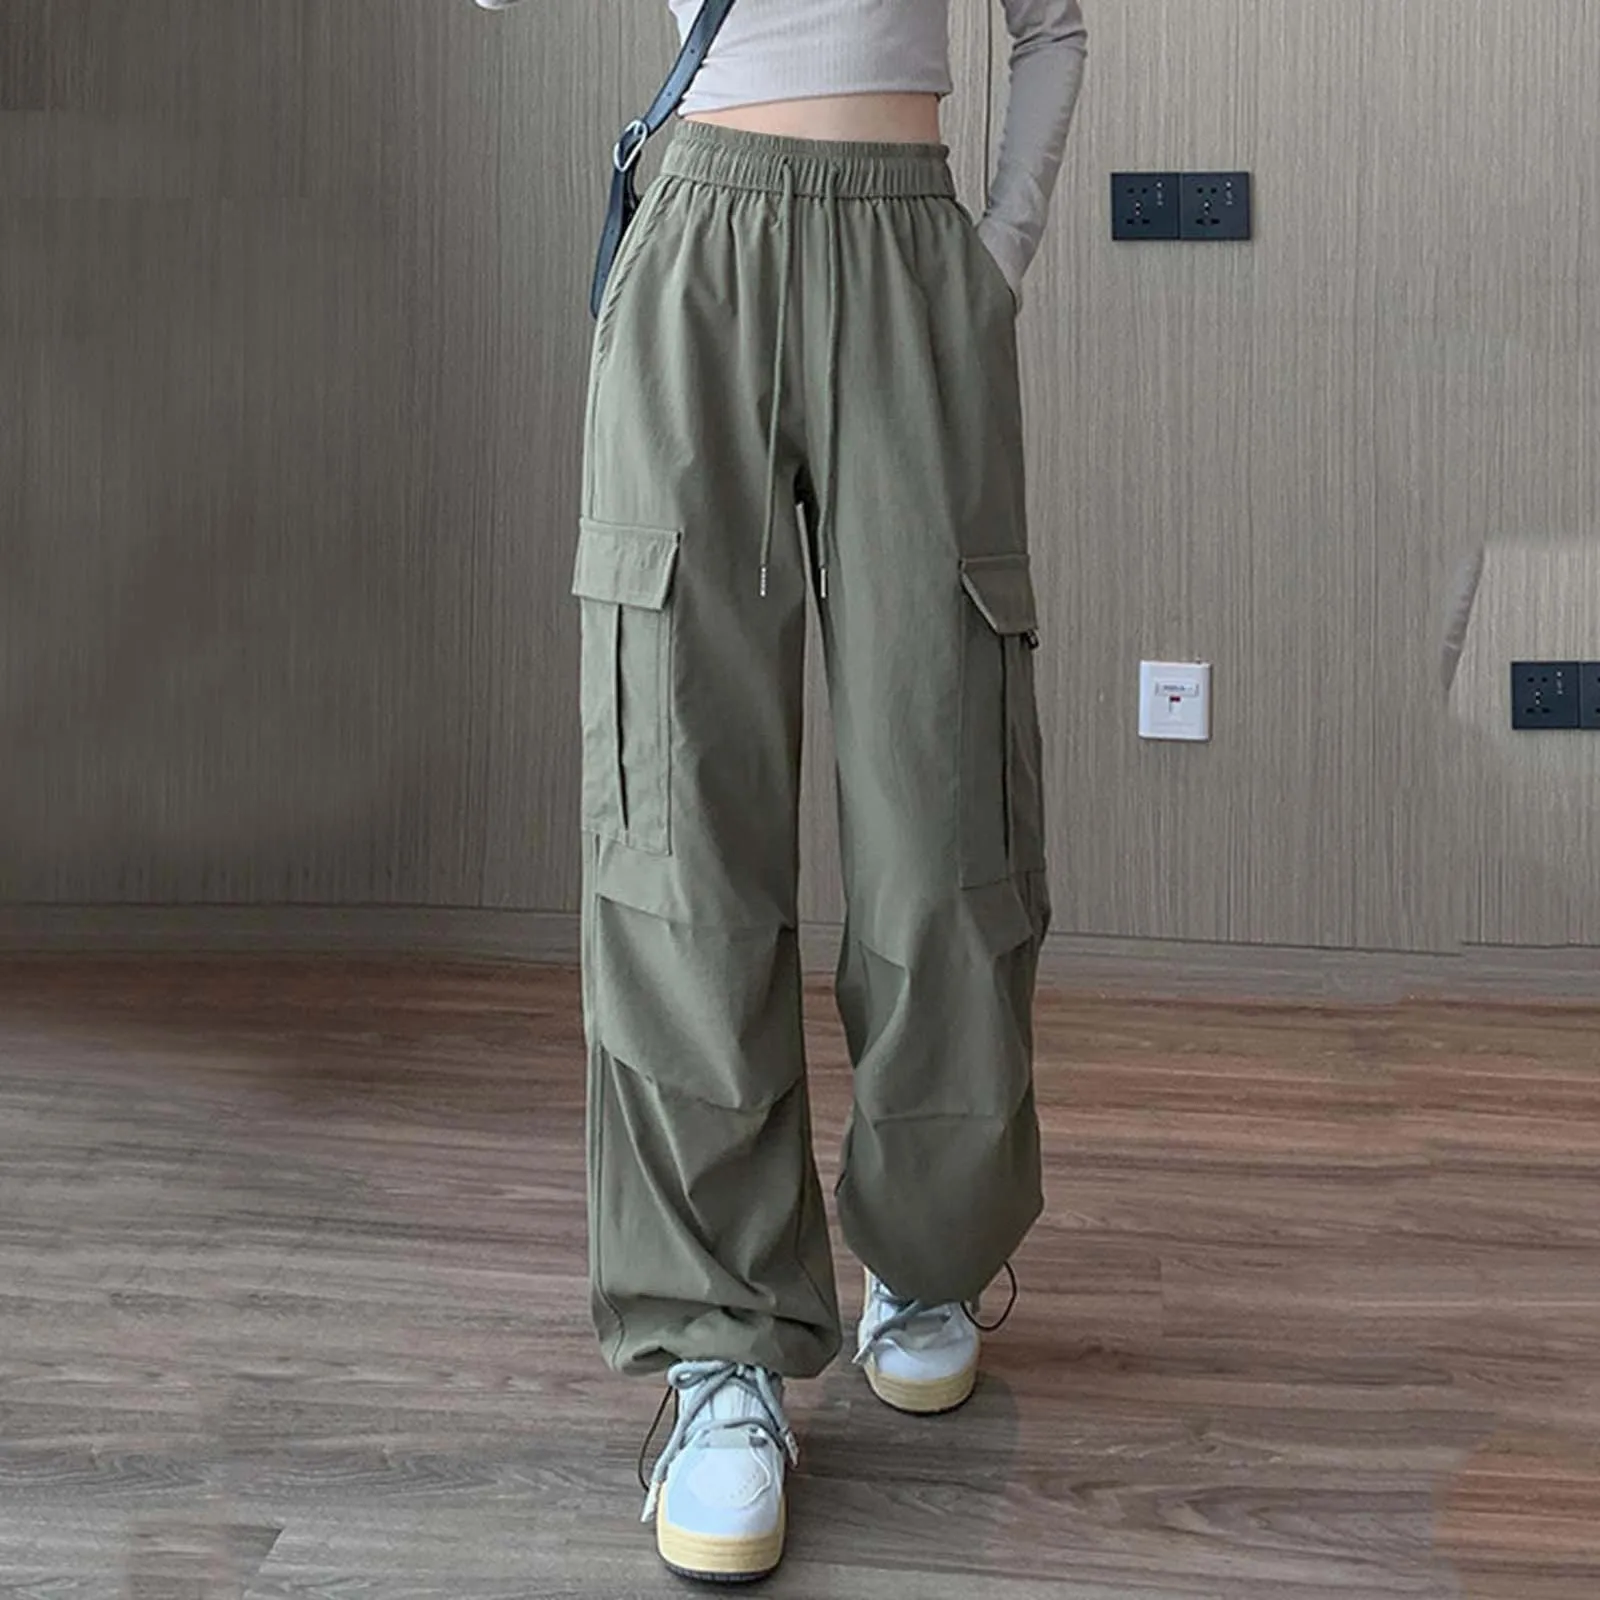 

Women's Casual Sweatpants Relaxed Fit Loose Clothes High Waist Drawstring Waist Plus Size Baggy Cargo Pants For Women Casual